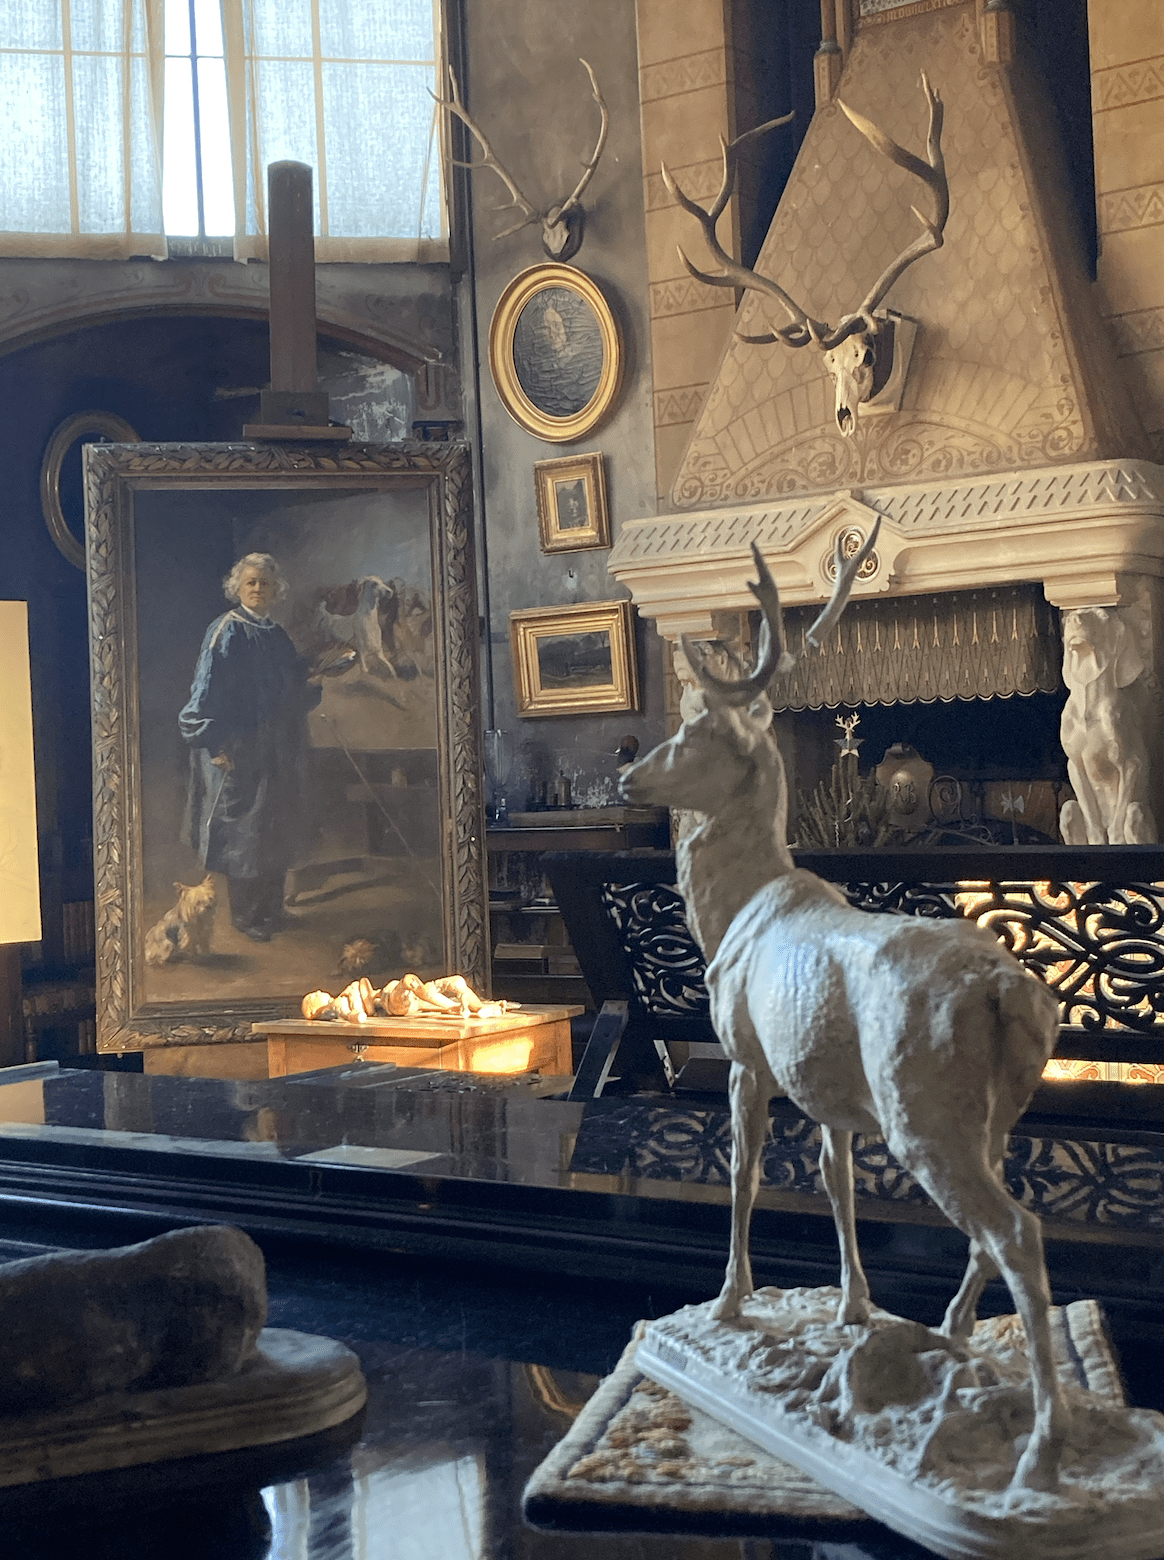 fireplace with painting and deer statue